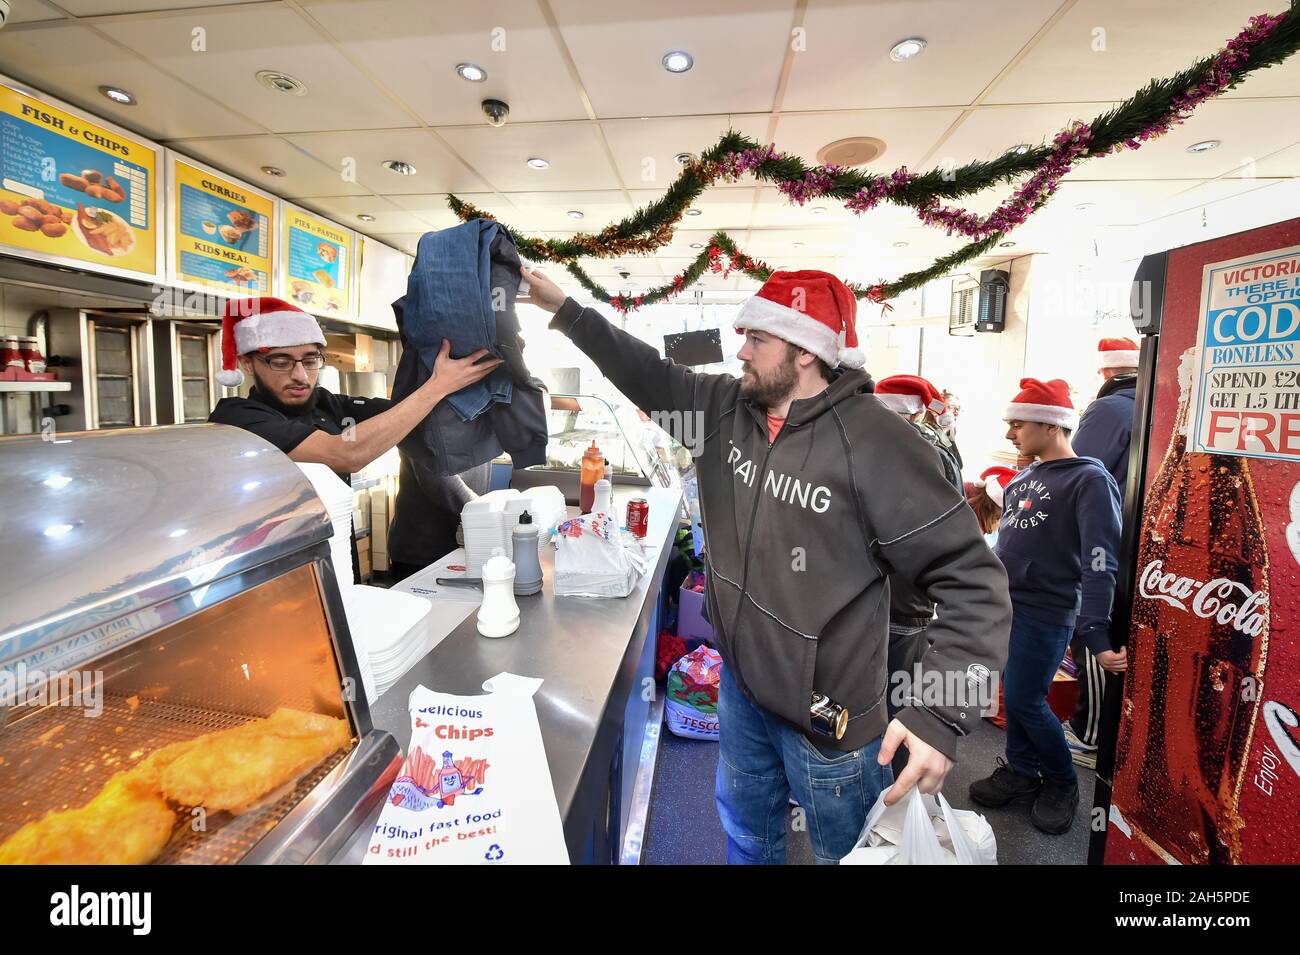 Daniel Jenkins, 34, is given fish and chips and extra clothing from donations as staff serve free portions of fish and chips to the homeless, needy, elderly and vulnerable on Christmas Day. Stock Photo